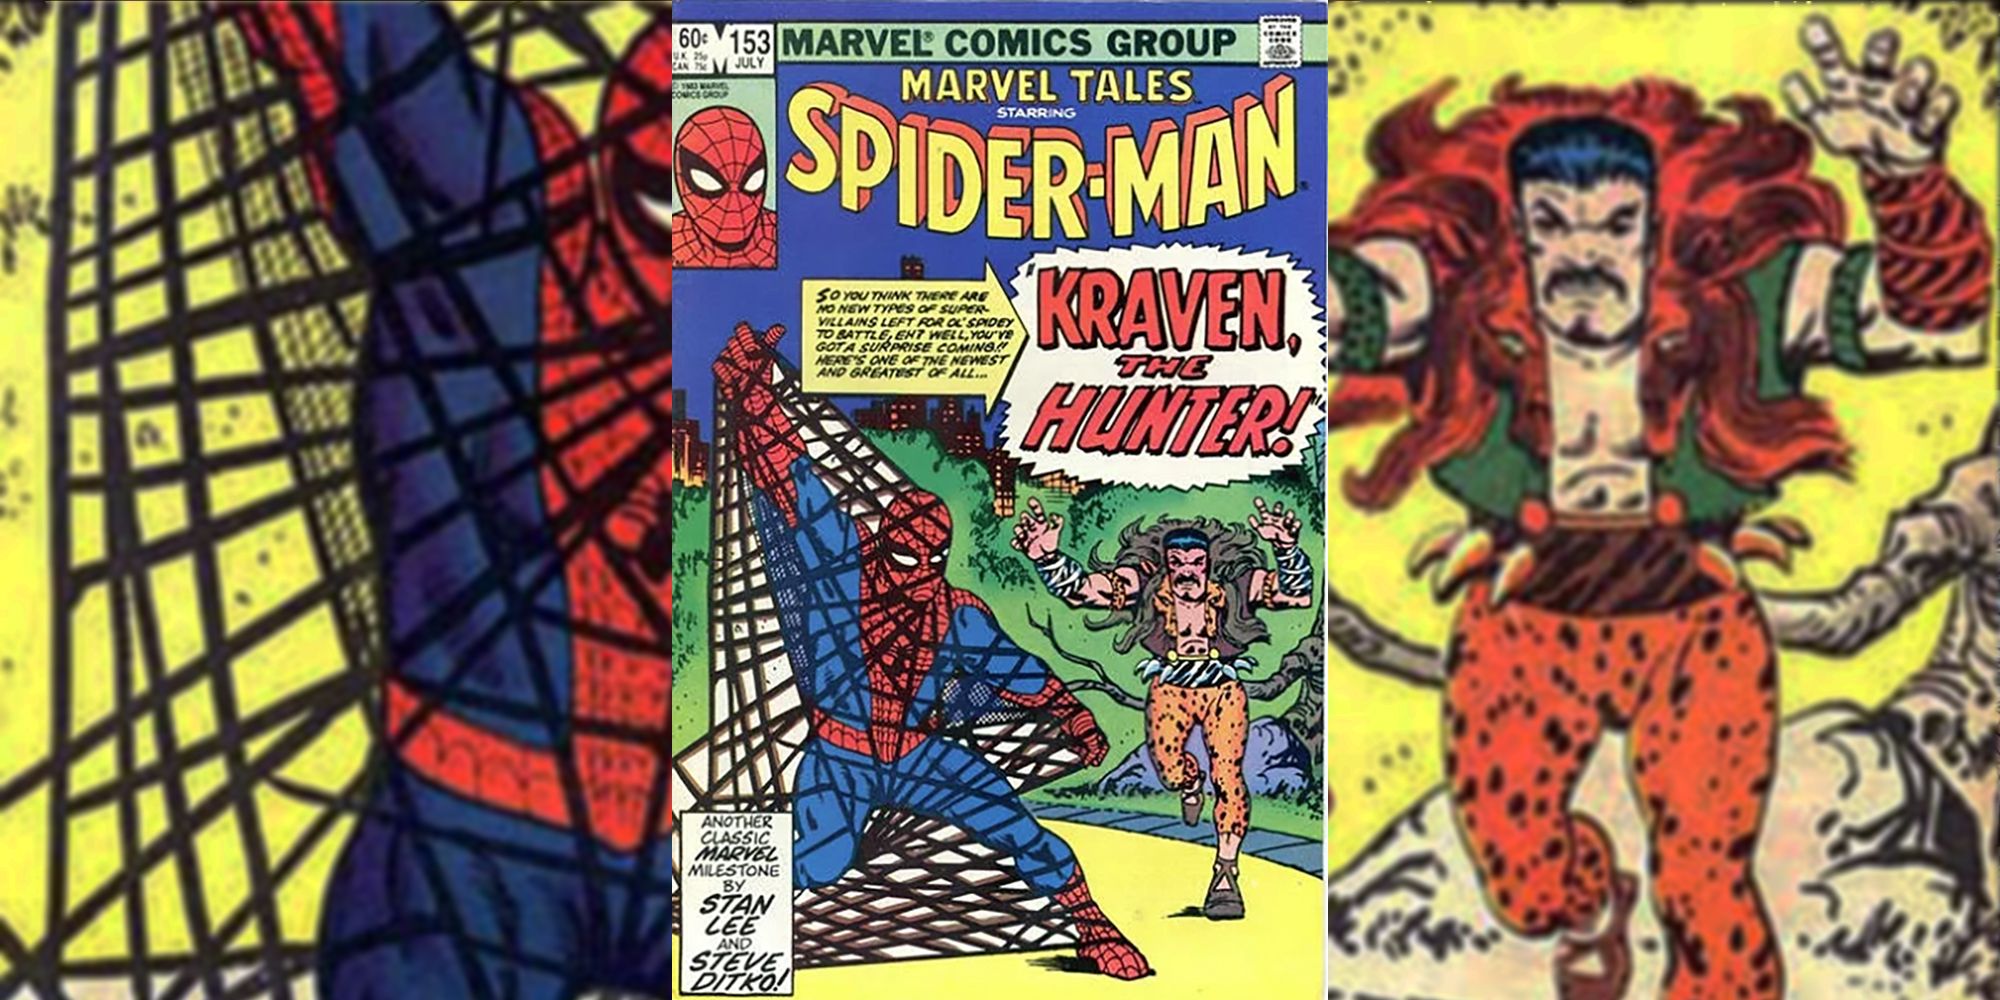 Kraven's First Appearance